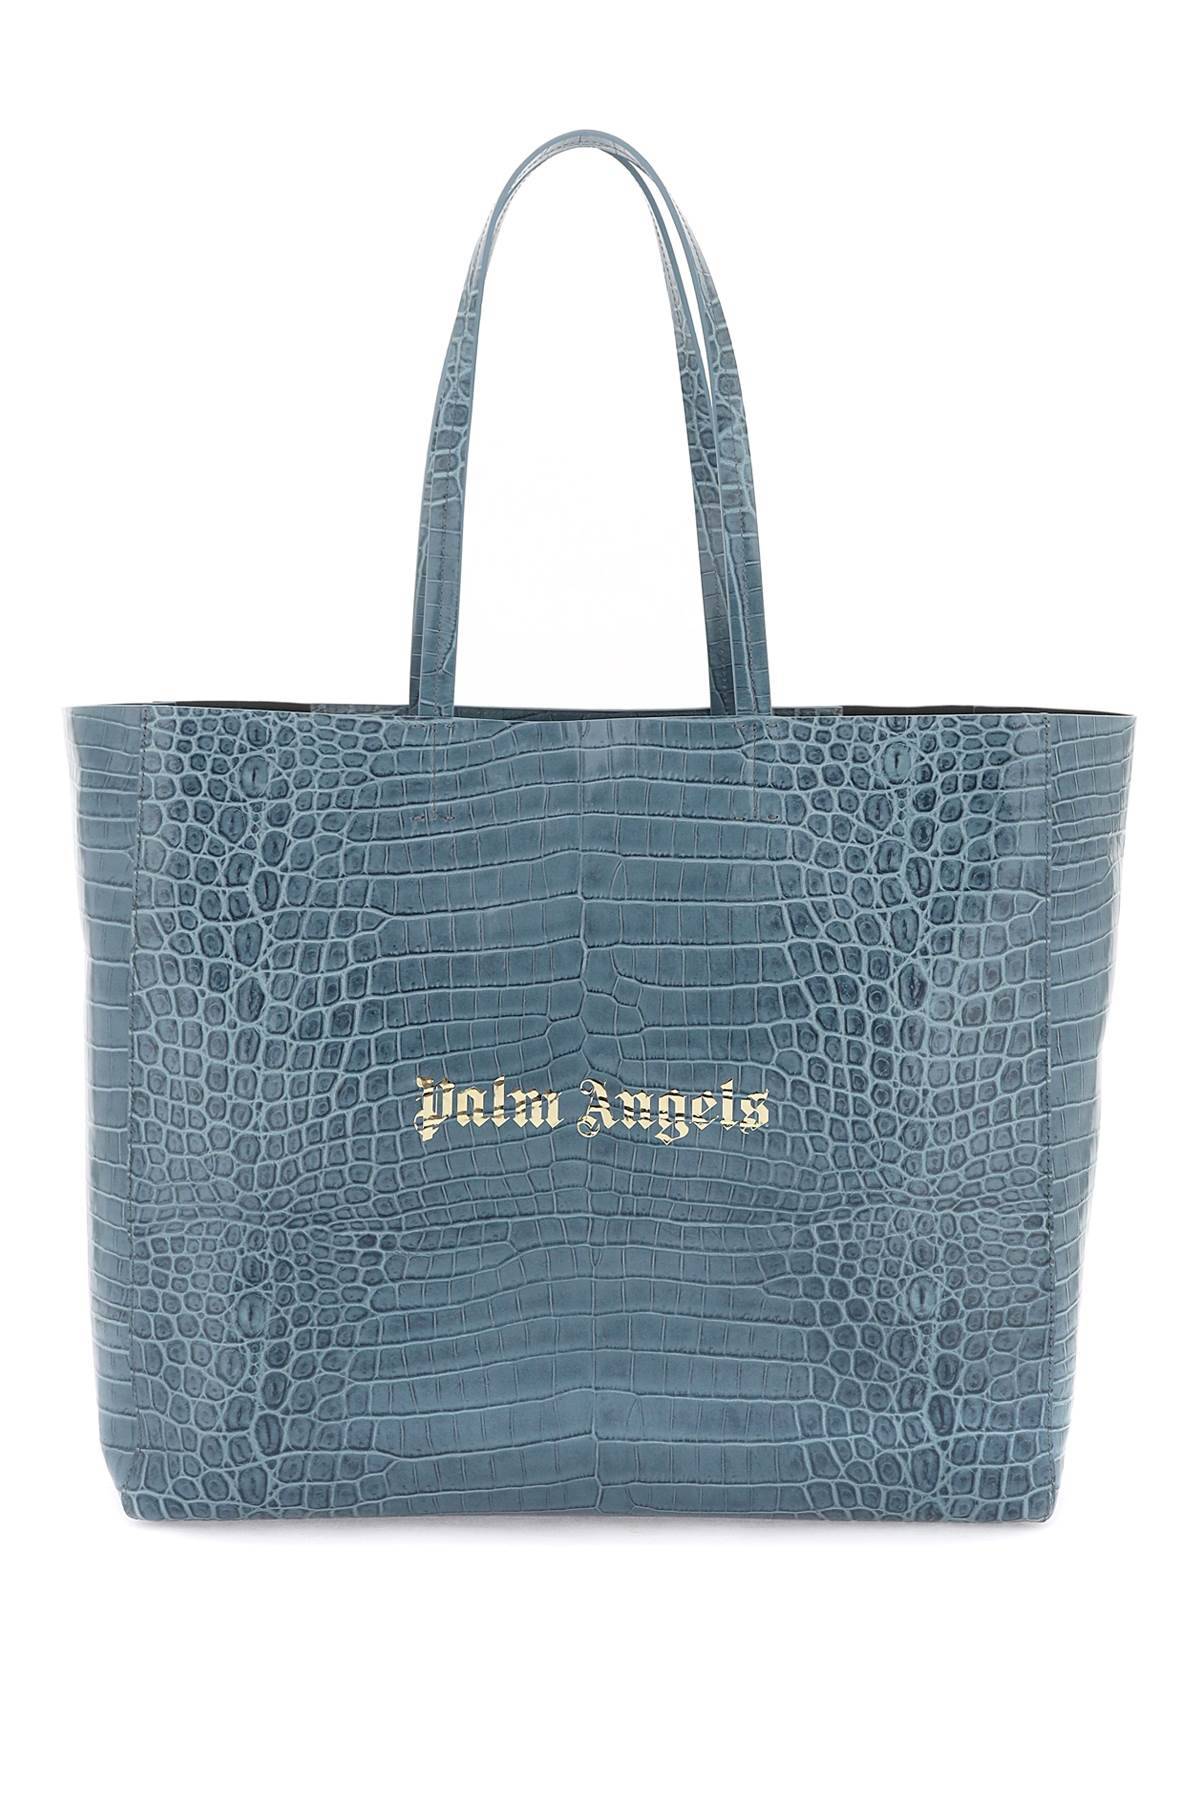 PALM ANGELS PALM ANGELS croco-embossed leather shopping bag